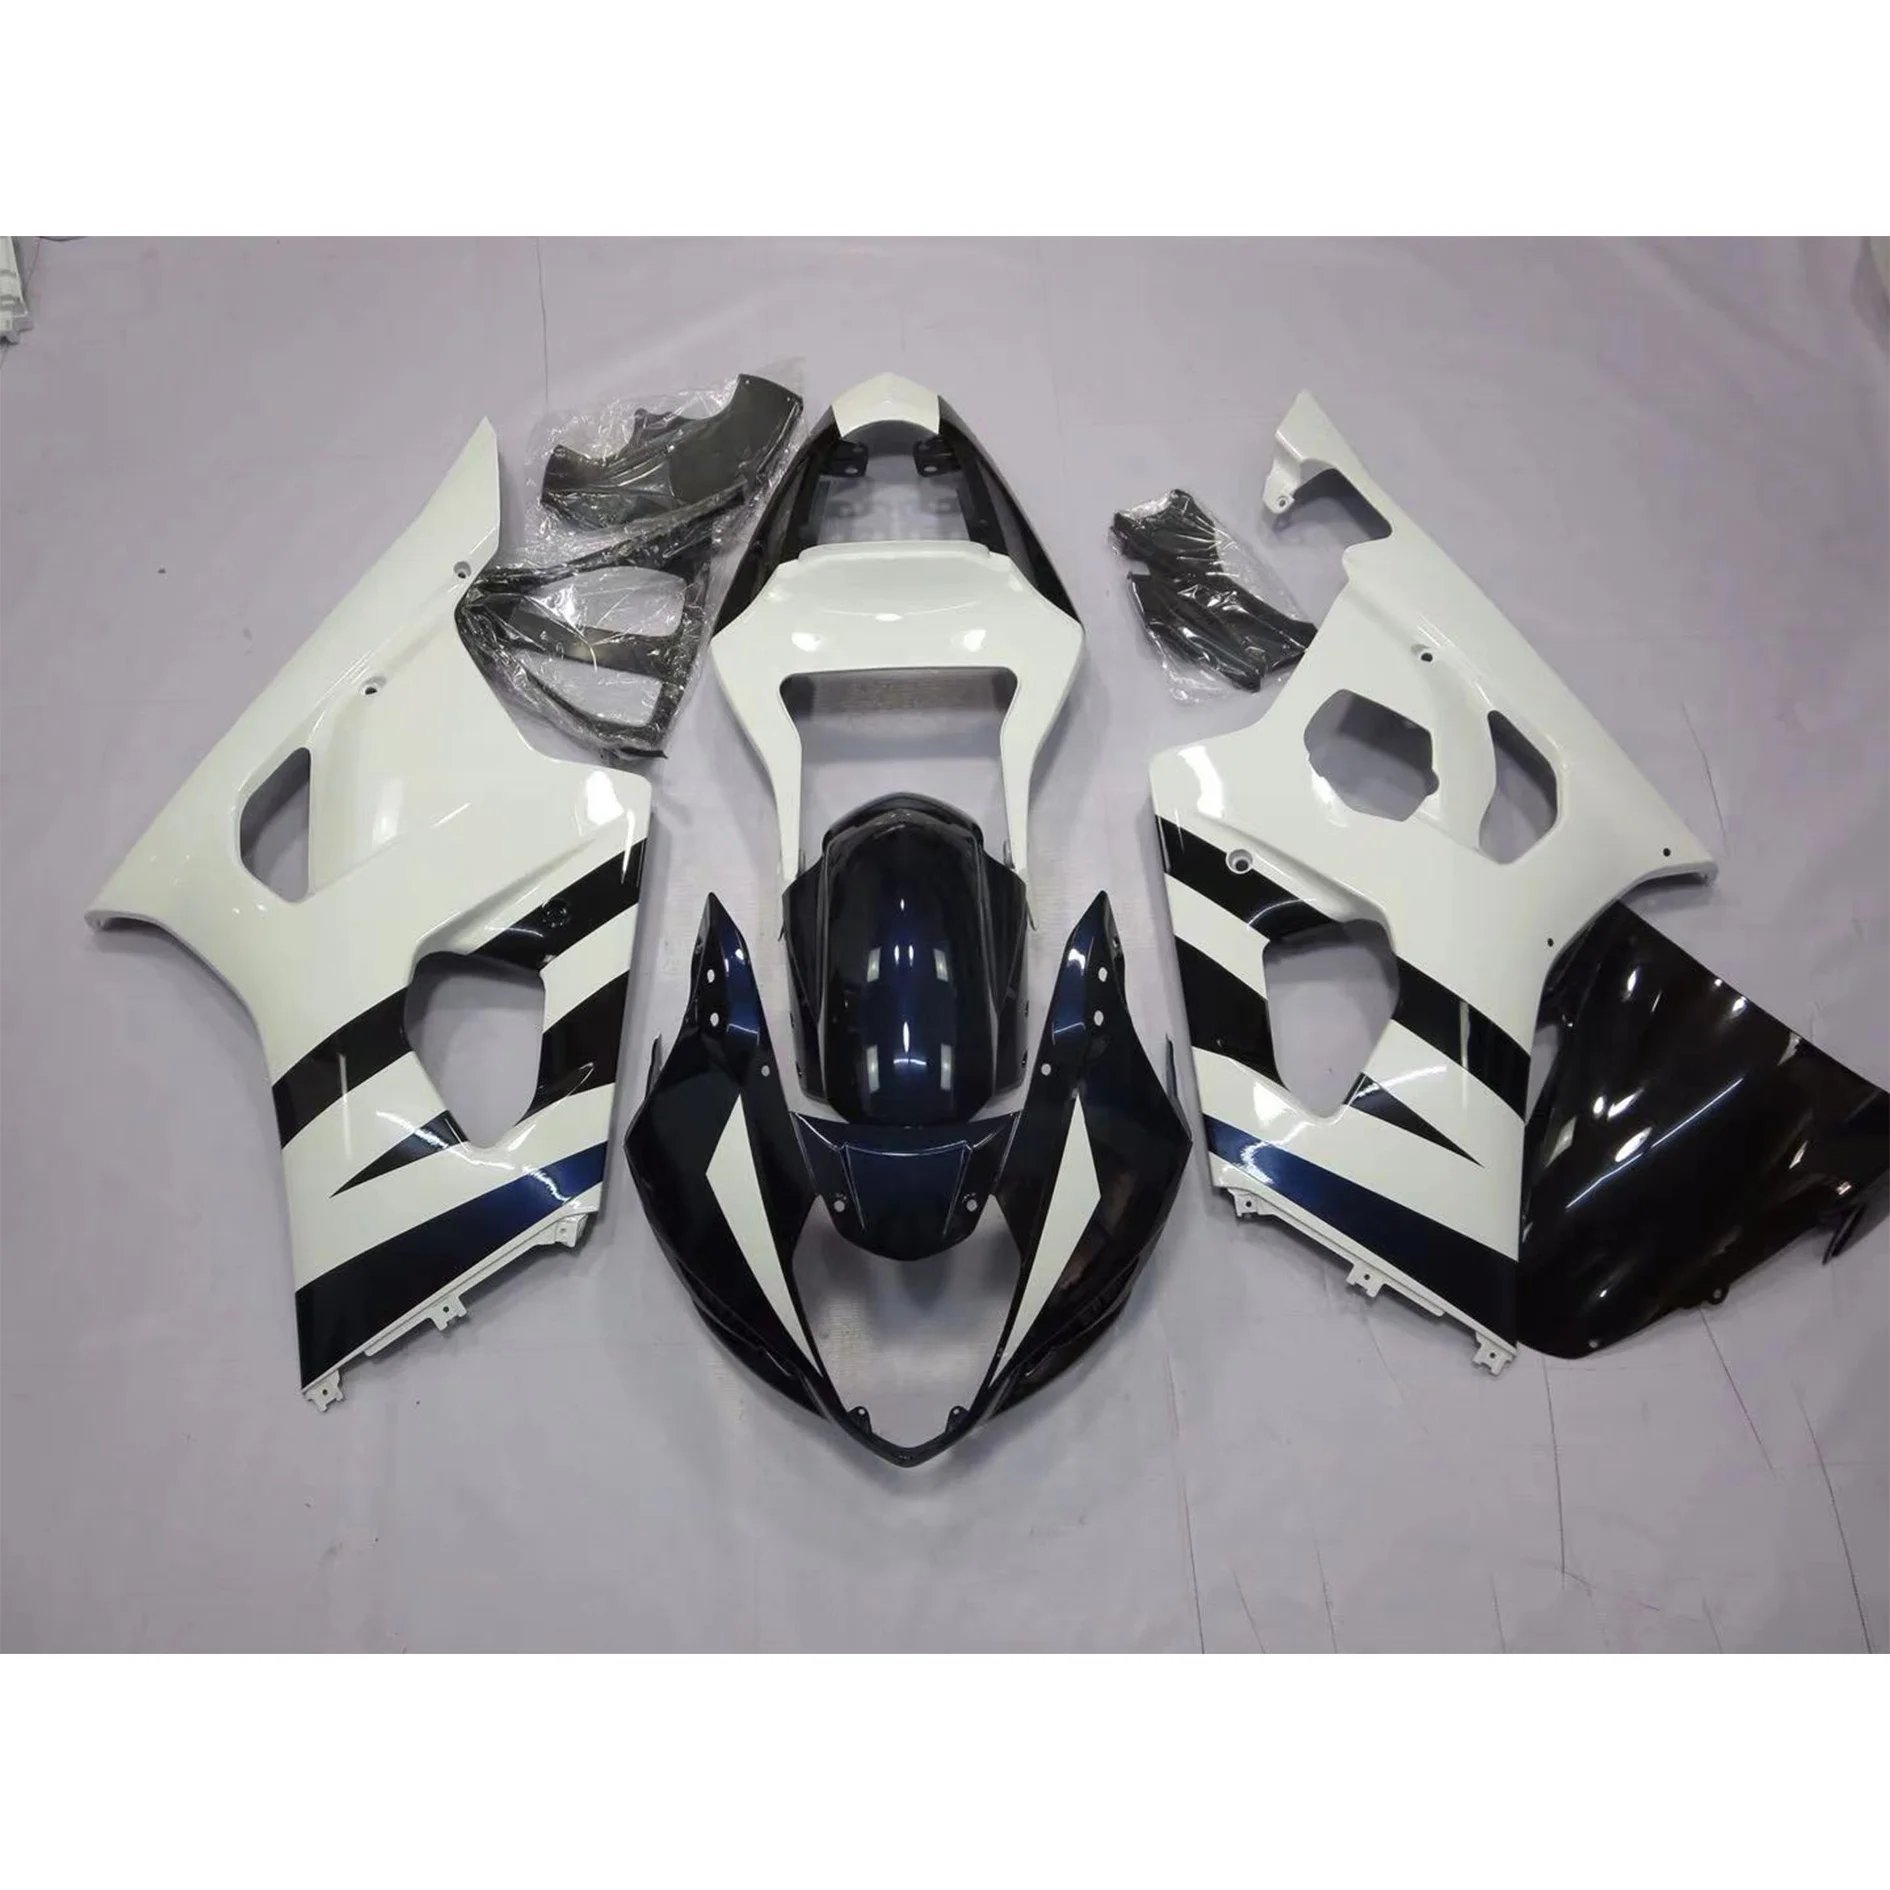 

2022 WHSC Gloss Black White Motorcycle Accessories For SUZUKI GSXR1000 2003-2004 03 04 K3 Motorcycle Body Systems Fairing Kits, Pictures shown